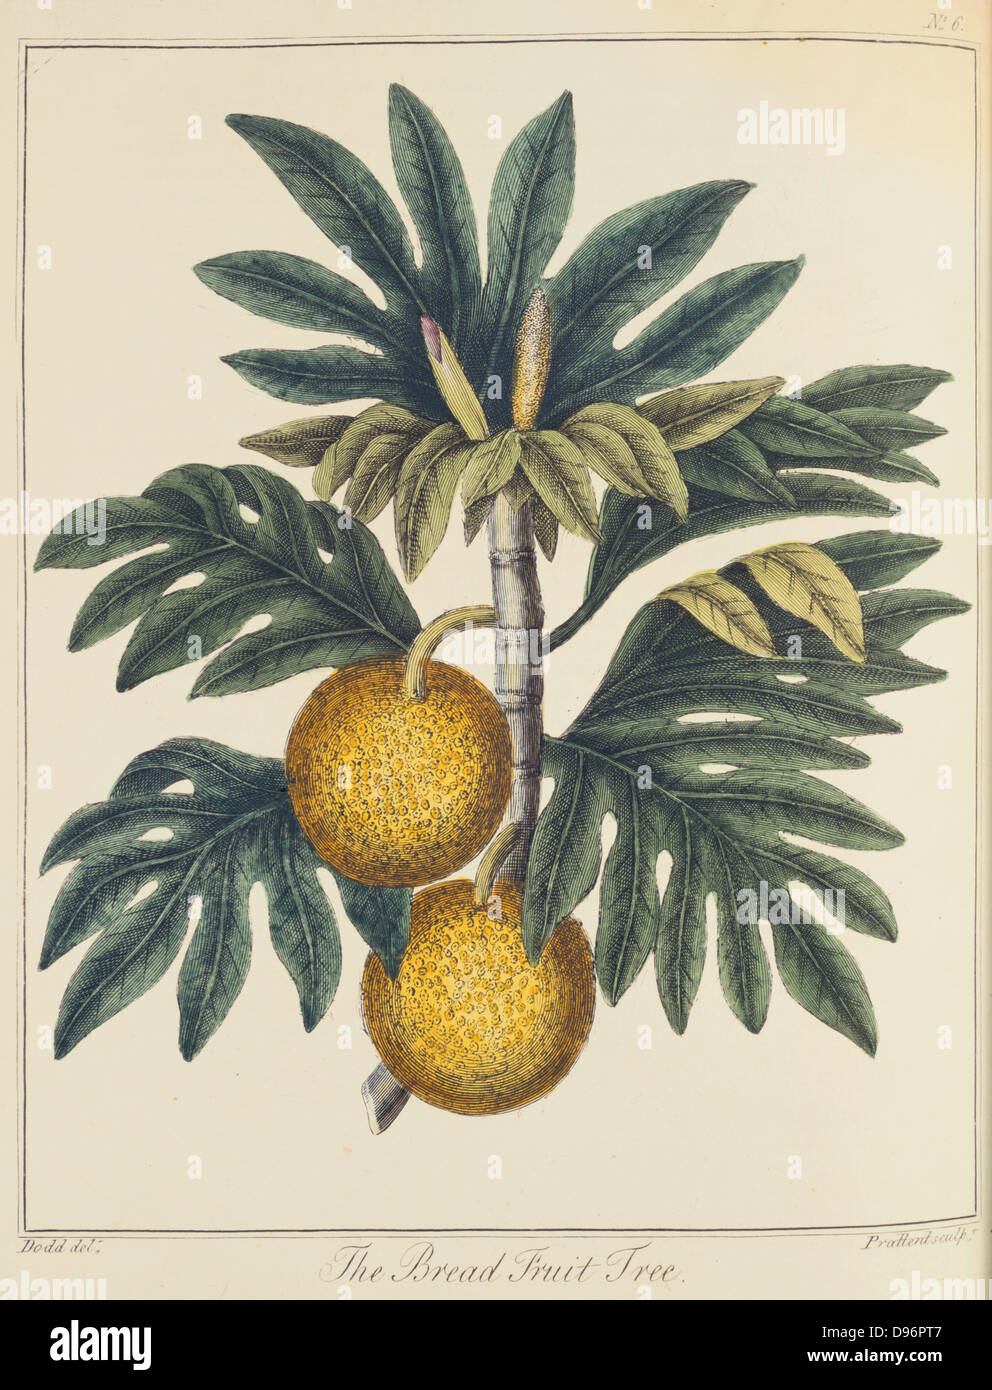 Breadfuit: Artocarpus incisus.  Tree with fruit with white pulp like new bread, introduced into West Indies as important food crop for plantation slaves. Captain Bligh of HMS 'Bounty' fame was given the task of transporting stock plants from the South Sea Islands.From 'A Key to Physic' by Ebenezer Sibly. (London c1798).  Hand-coloured engraving. Stock Photo